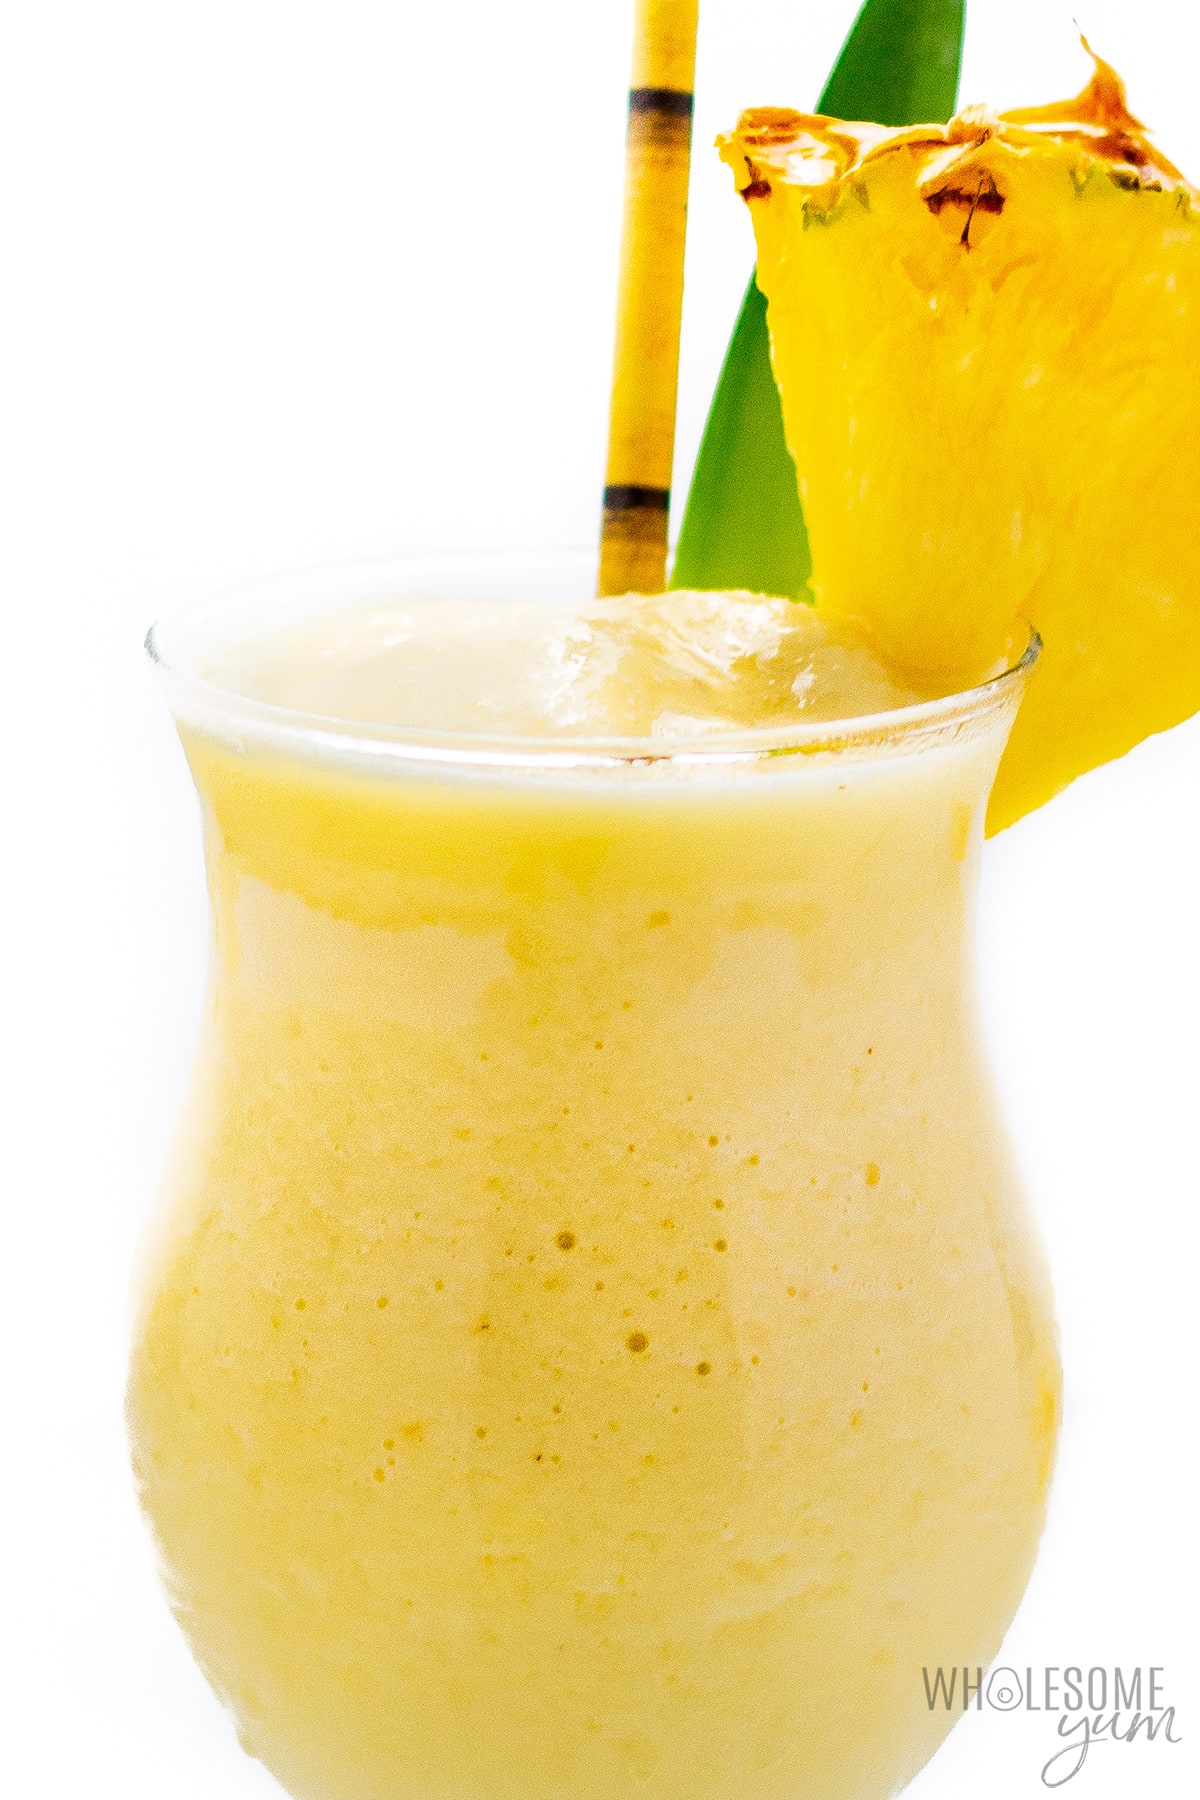 Frozen pina colada with straw and fresh pineapple wedge.